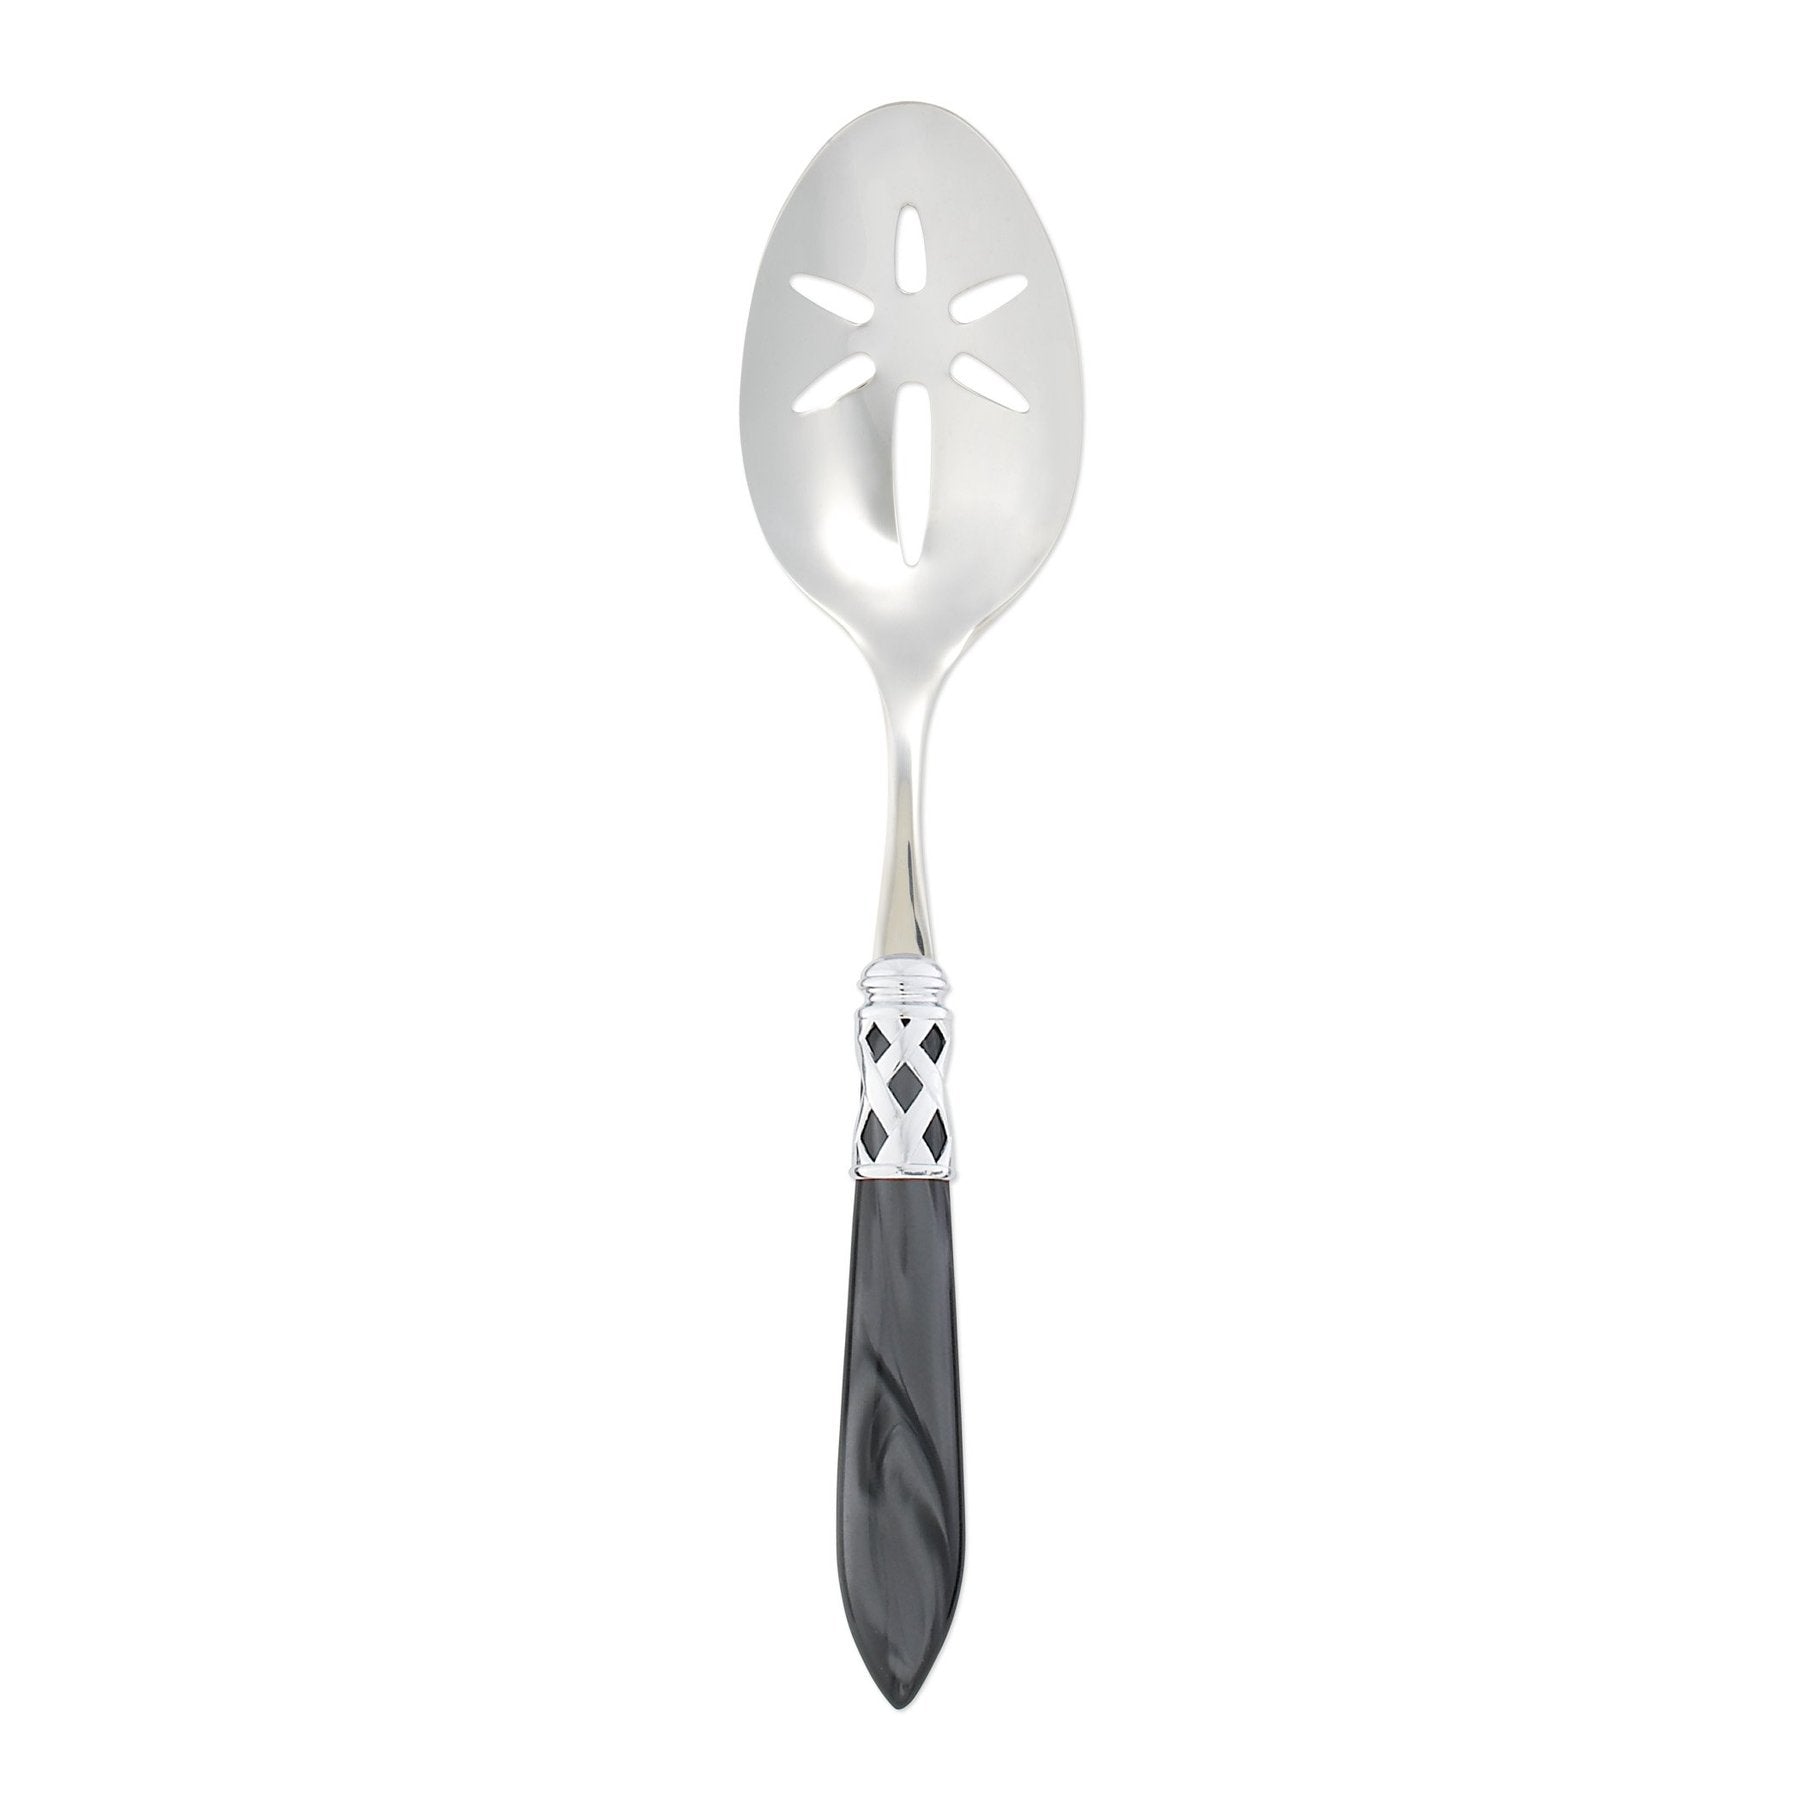 Aladdin Brilliant Charcoal Slotted Serving Spoon